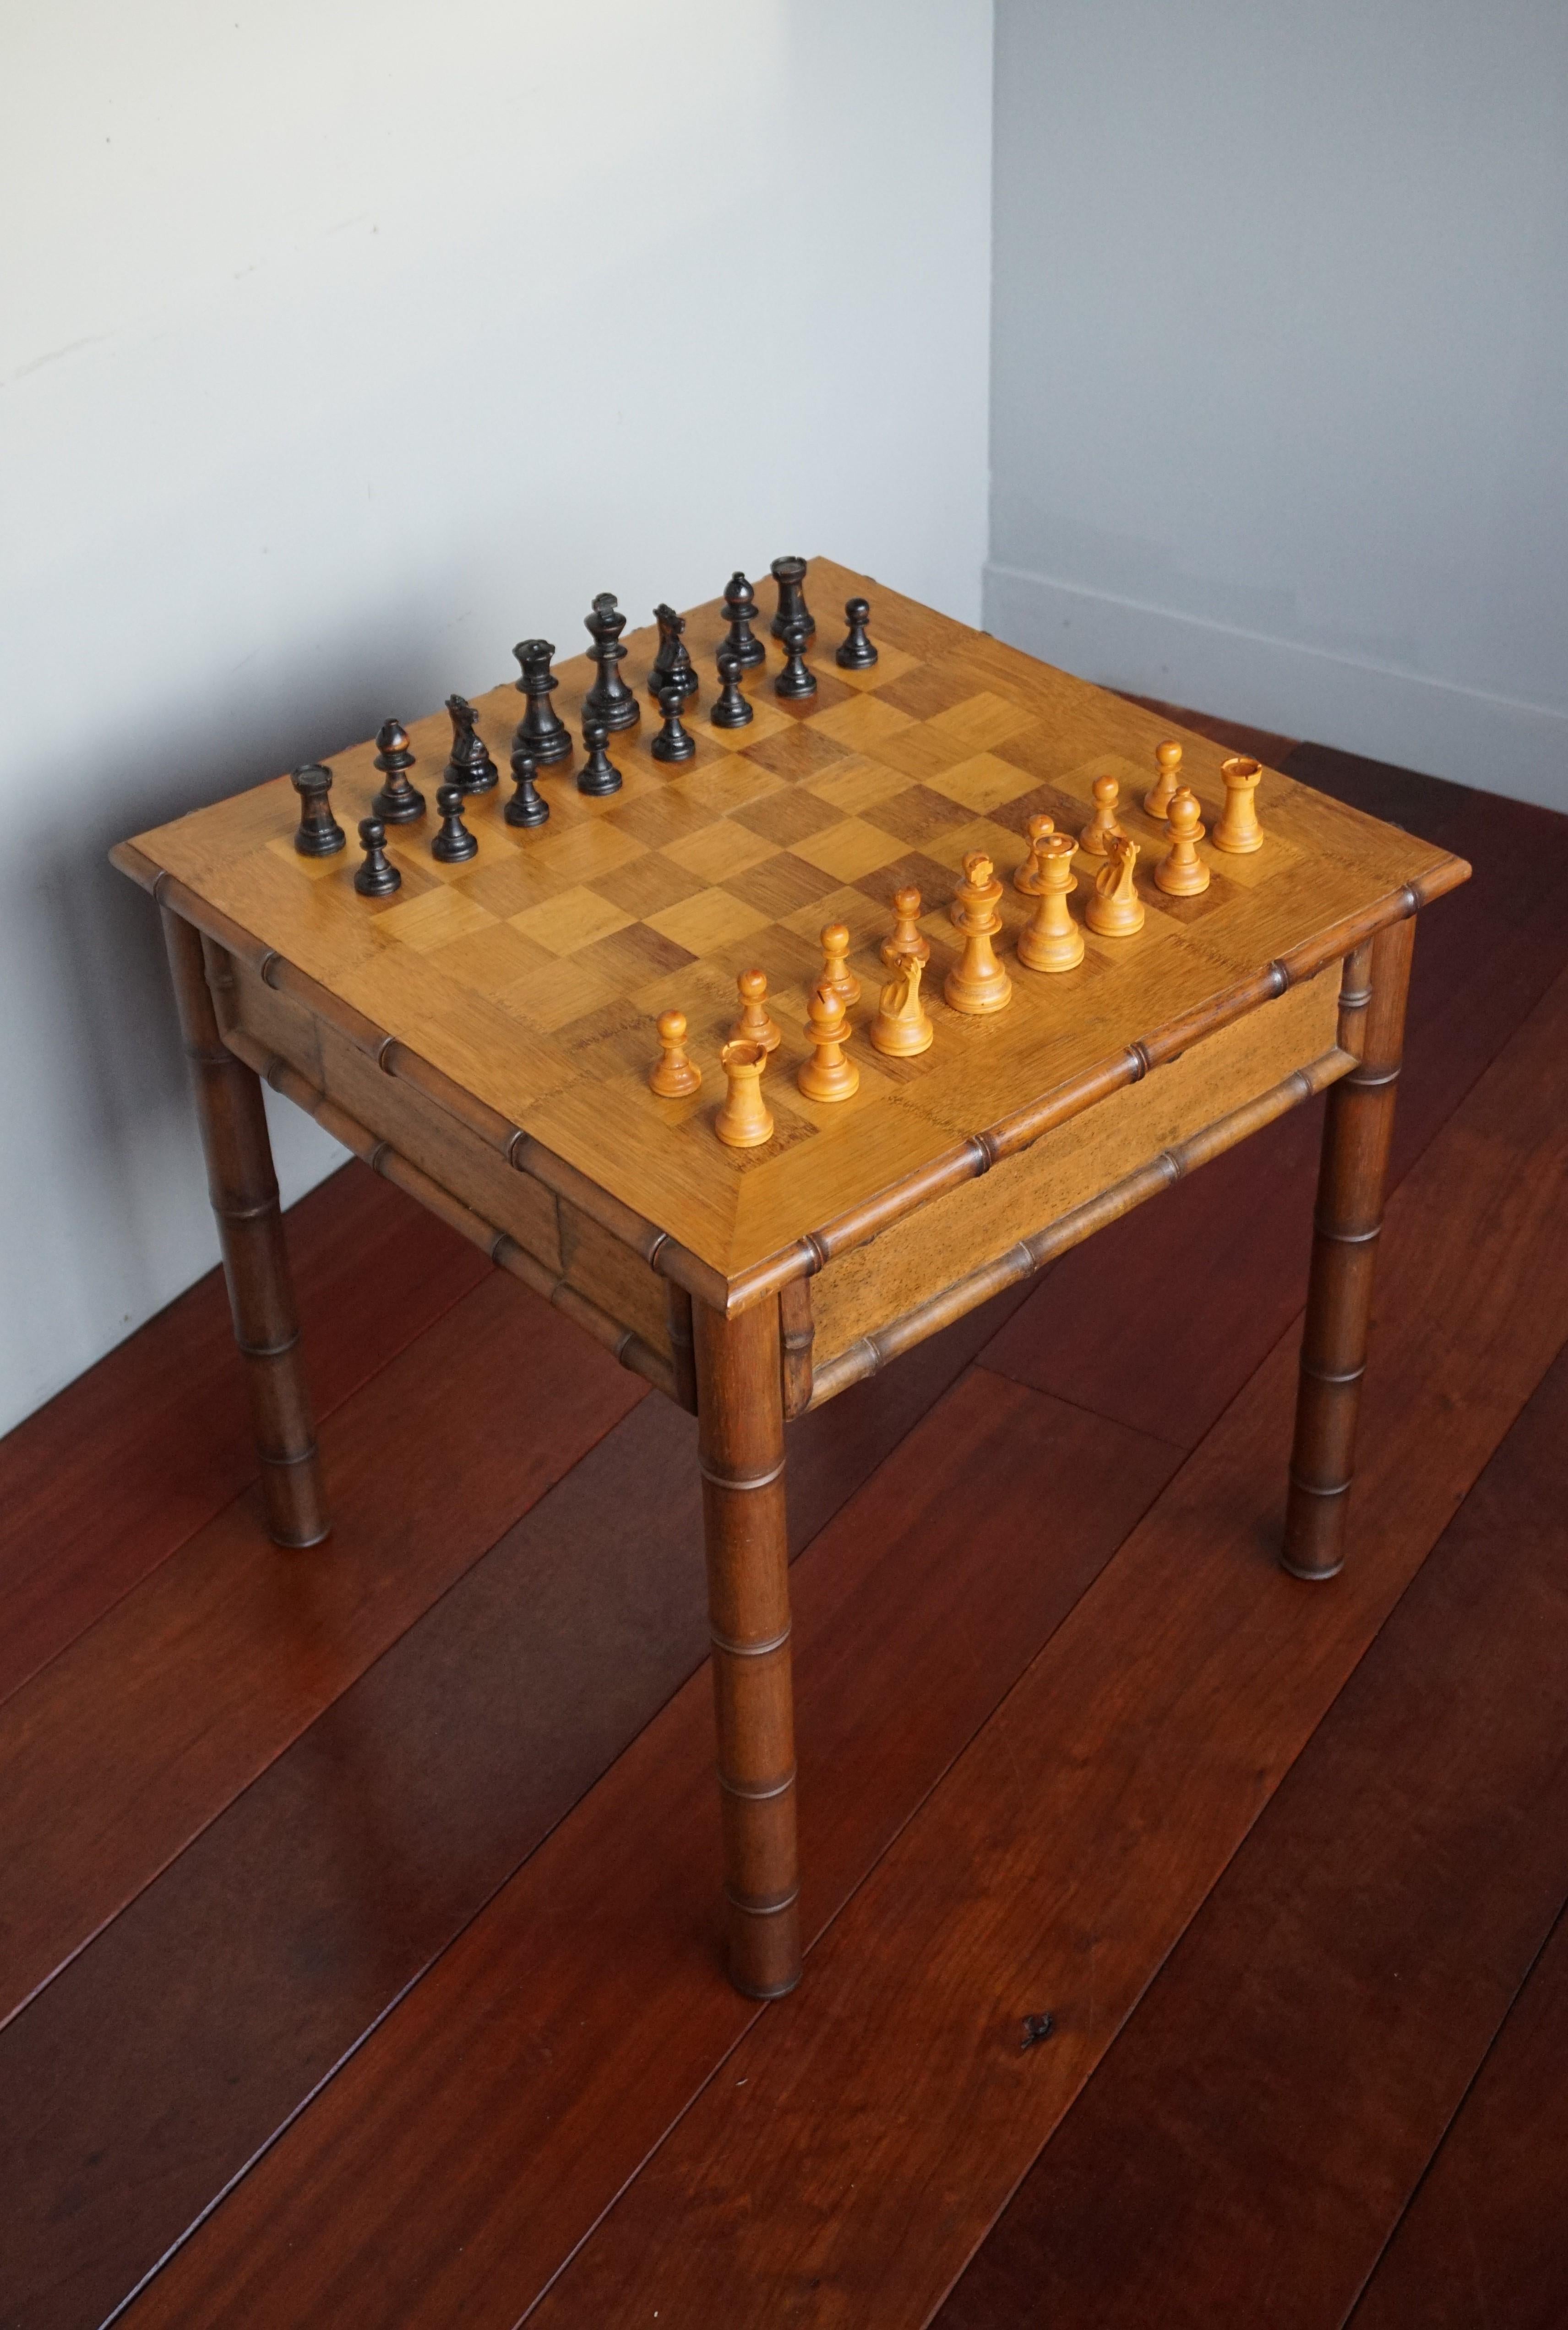 Rare and highly stylish chess table with a complete and hand carved wooden chess set.

Faux bamboo furniture has been circa since the 19th century and we have sold several pieces both at home and abroad. Most common are the wardrobes and chests of